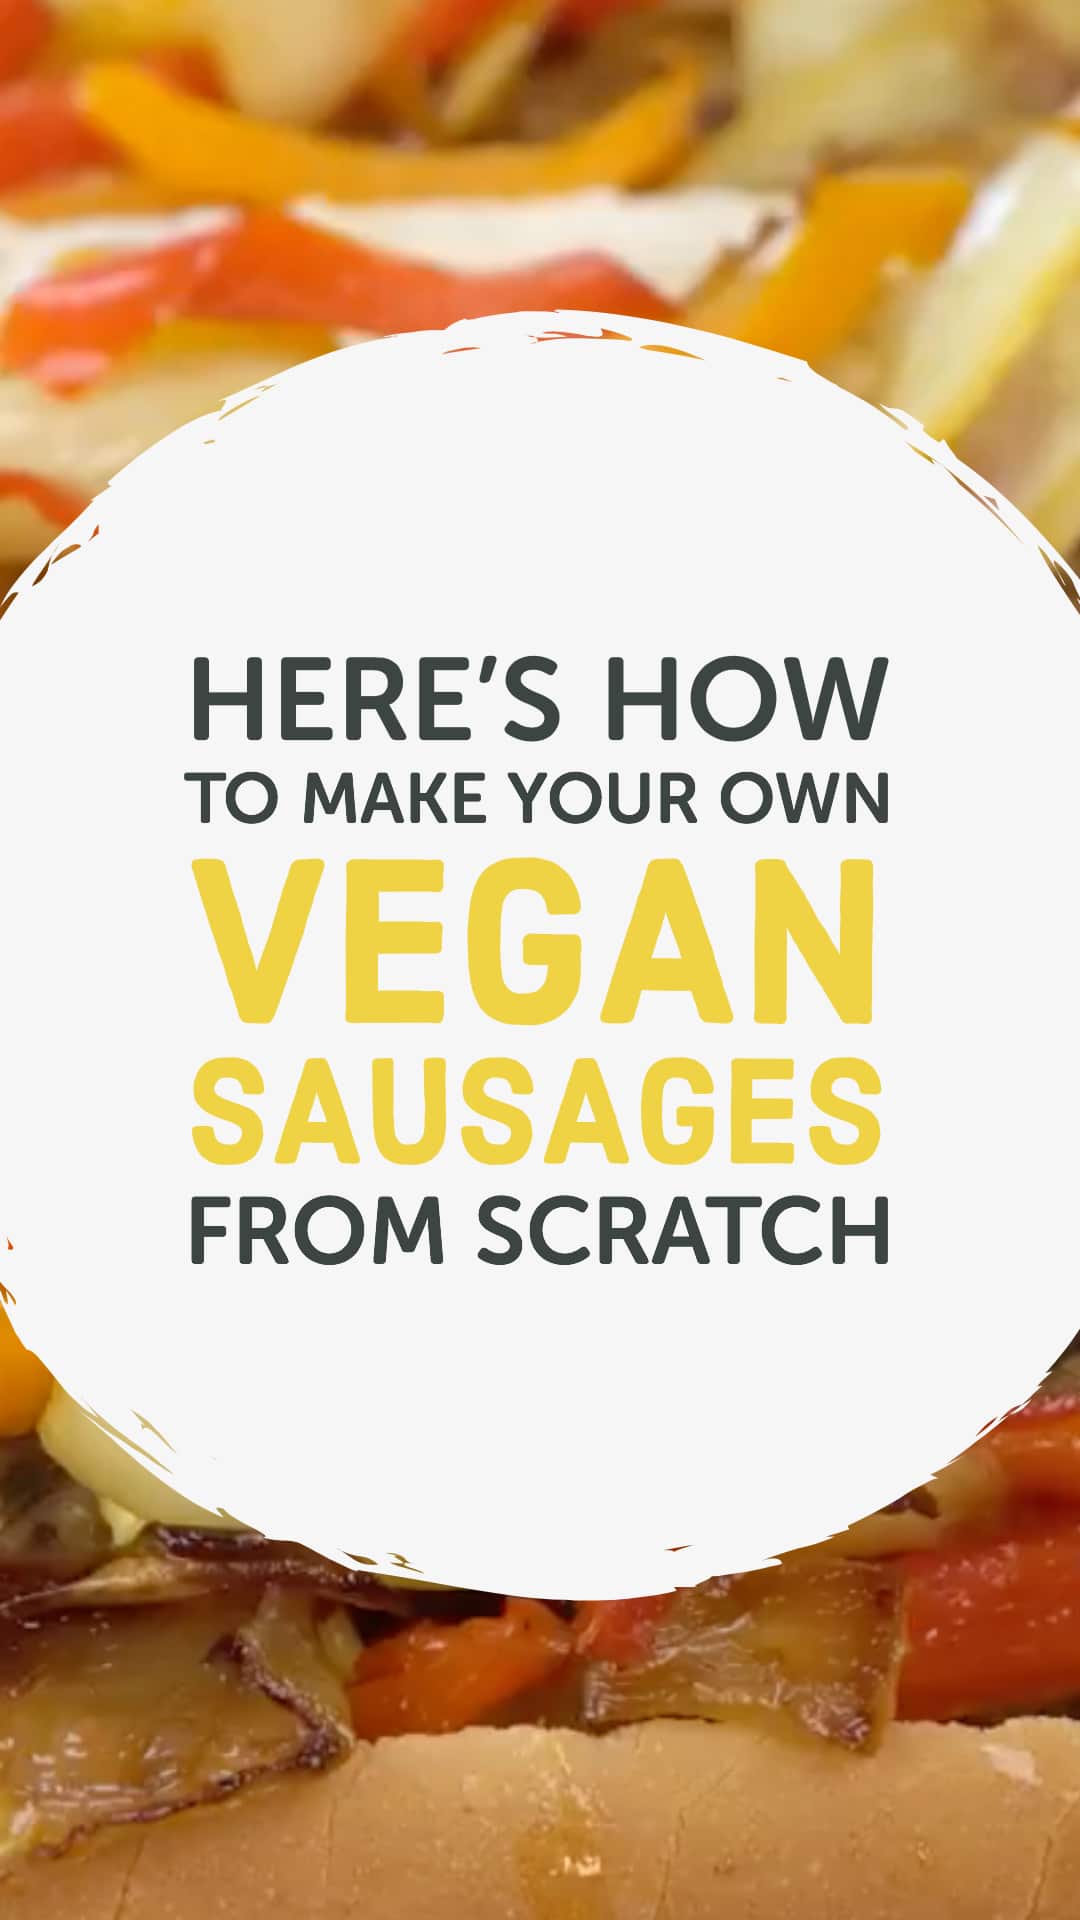 Here’s How to Make Your Own Vegan Sausages From Scratch